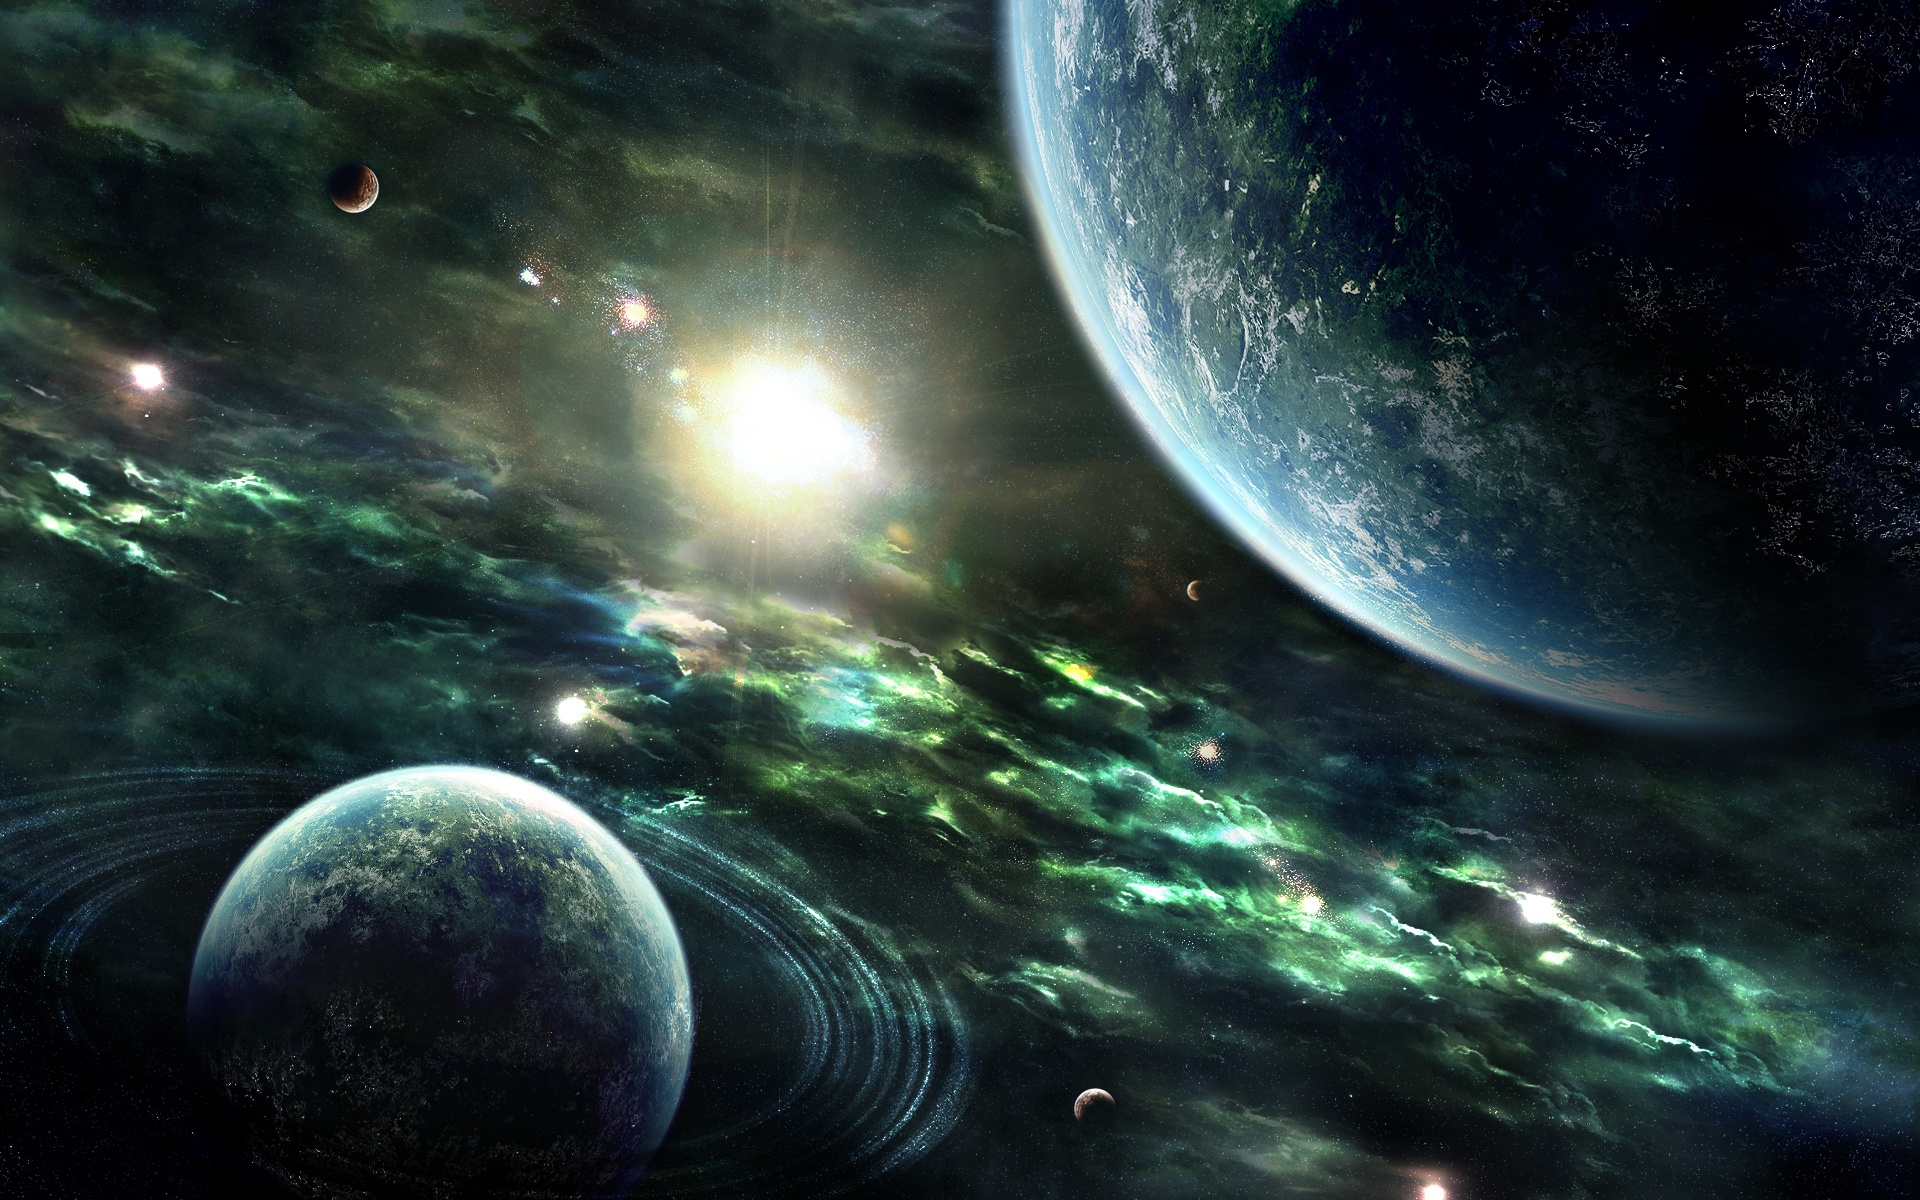 Wallpapers a supernova explosion in the universe a planet a planet with rings on the desktop